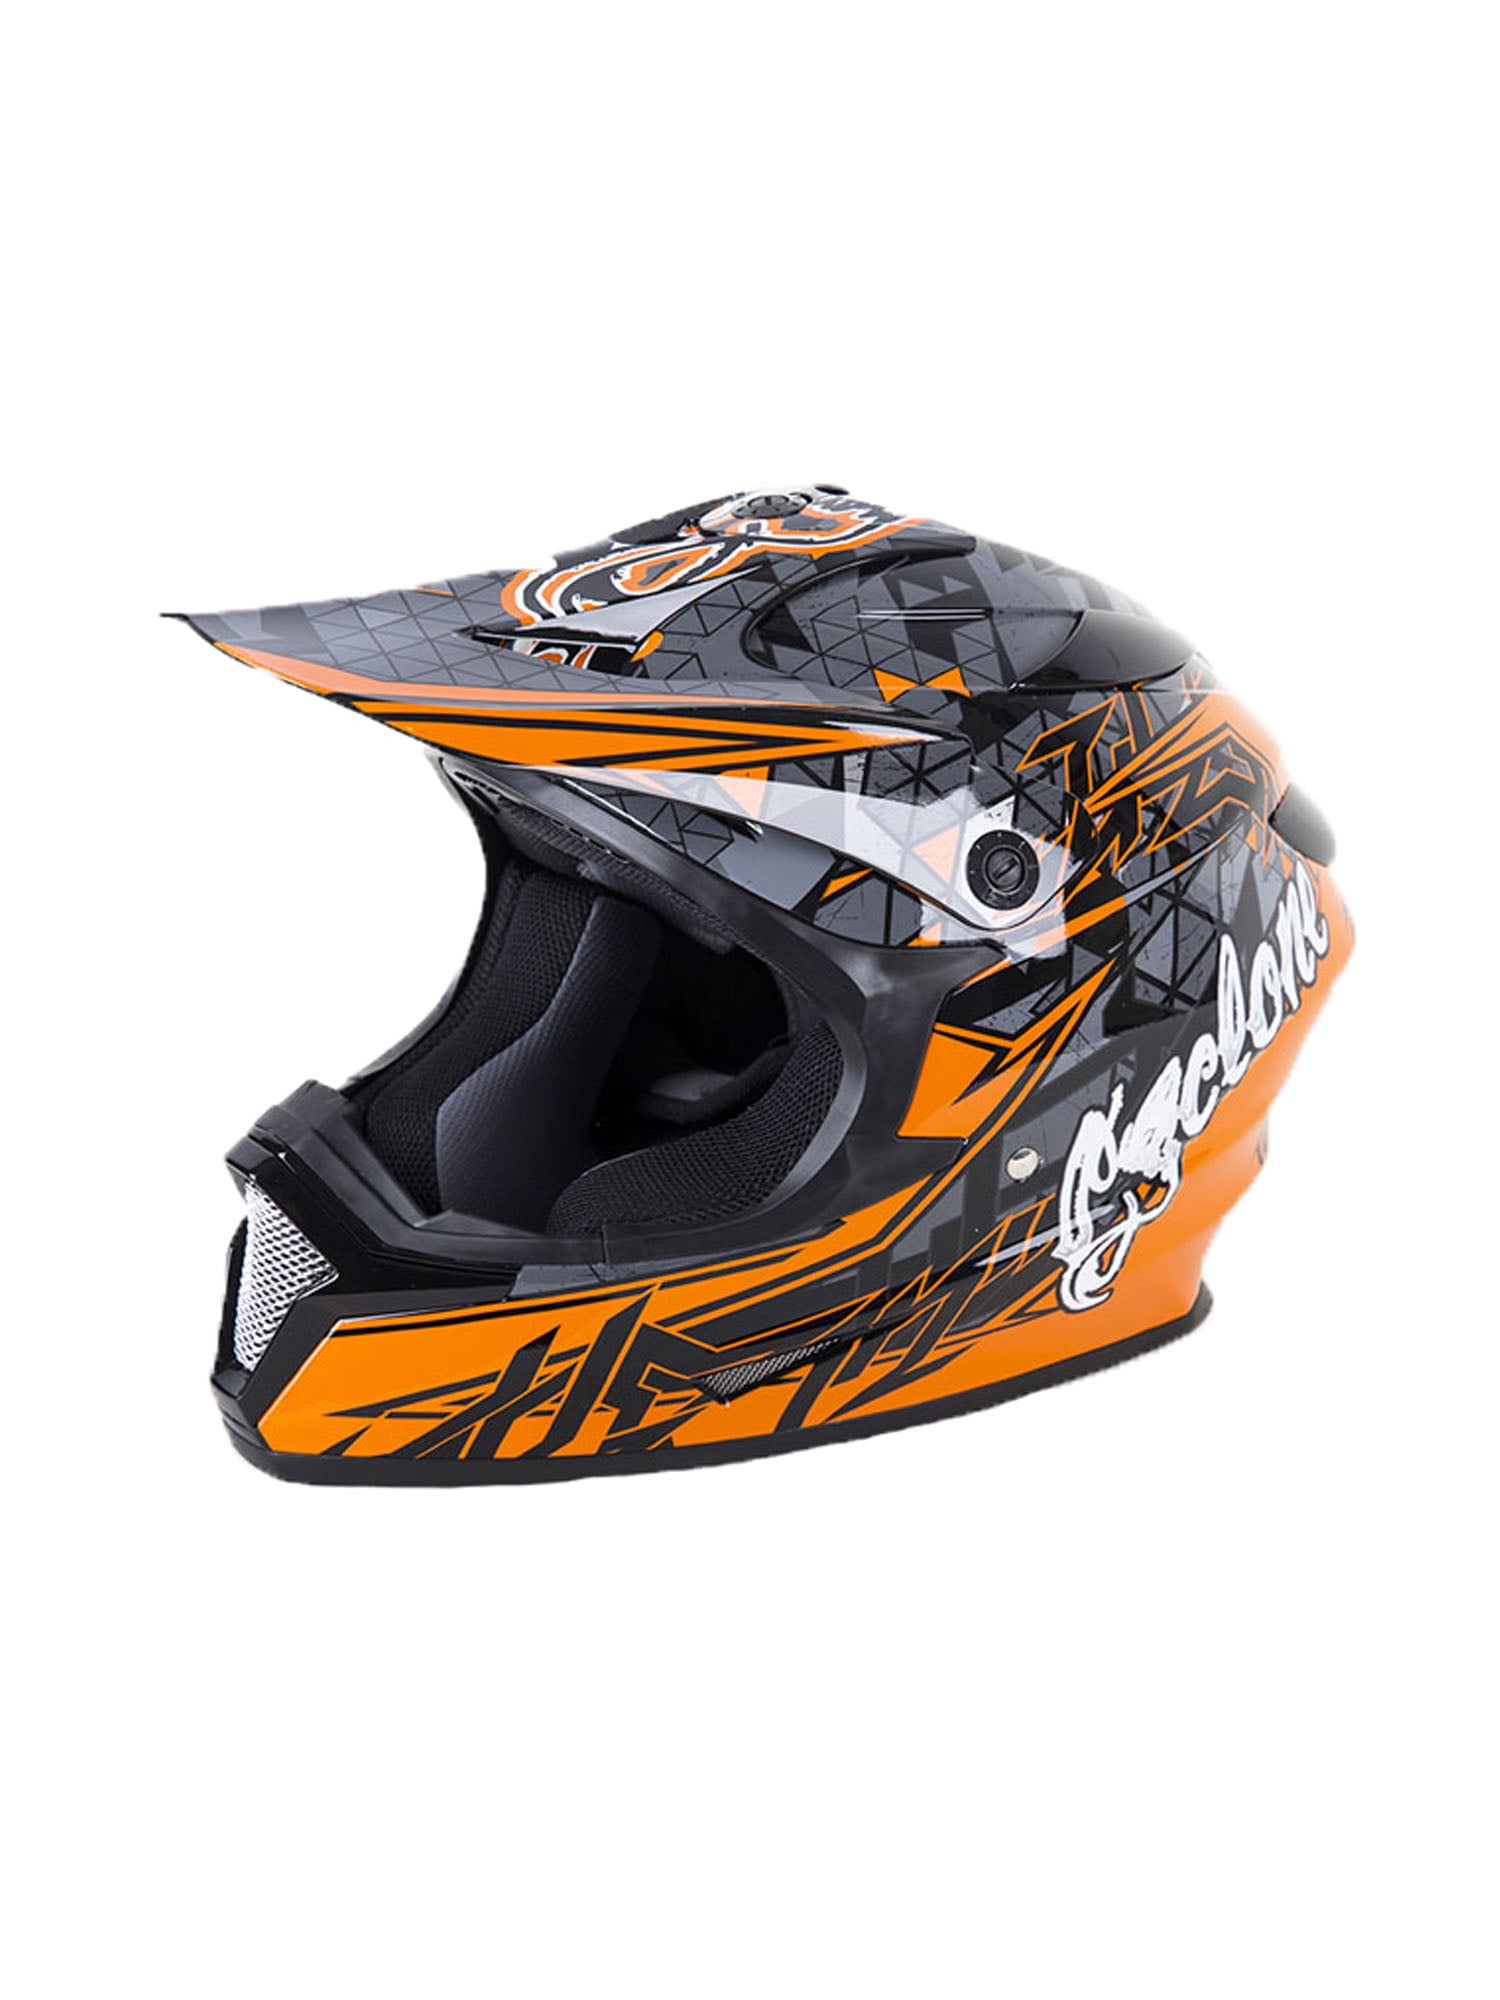 ATV MX Dirt Bike Off-Road Helmet DOT/ECE Approved with Goggle Mask and Gloves 